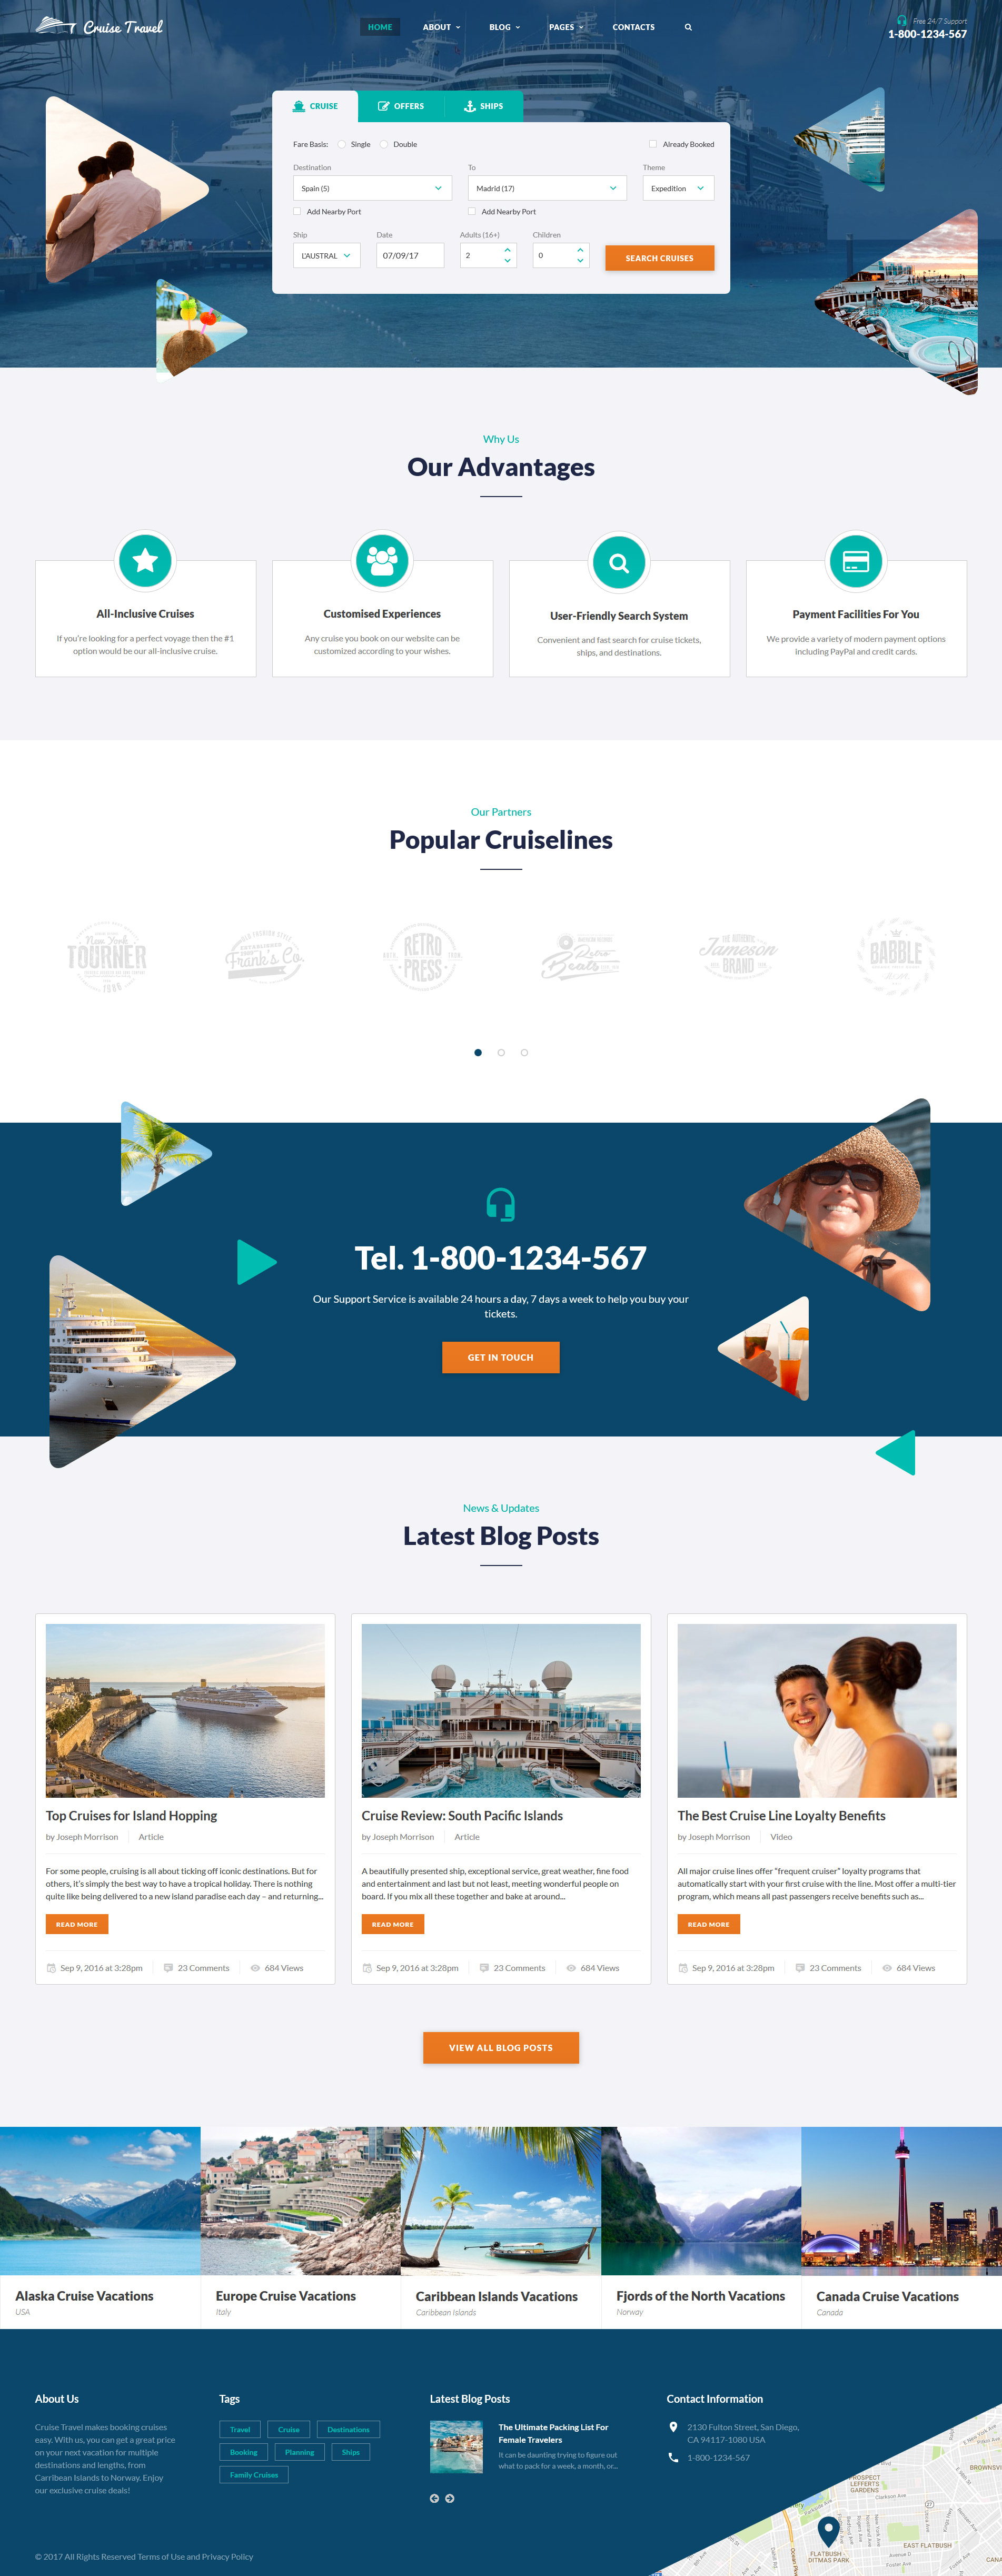 Cruise Travel - Travel Agency Multipage Website Template